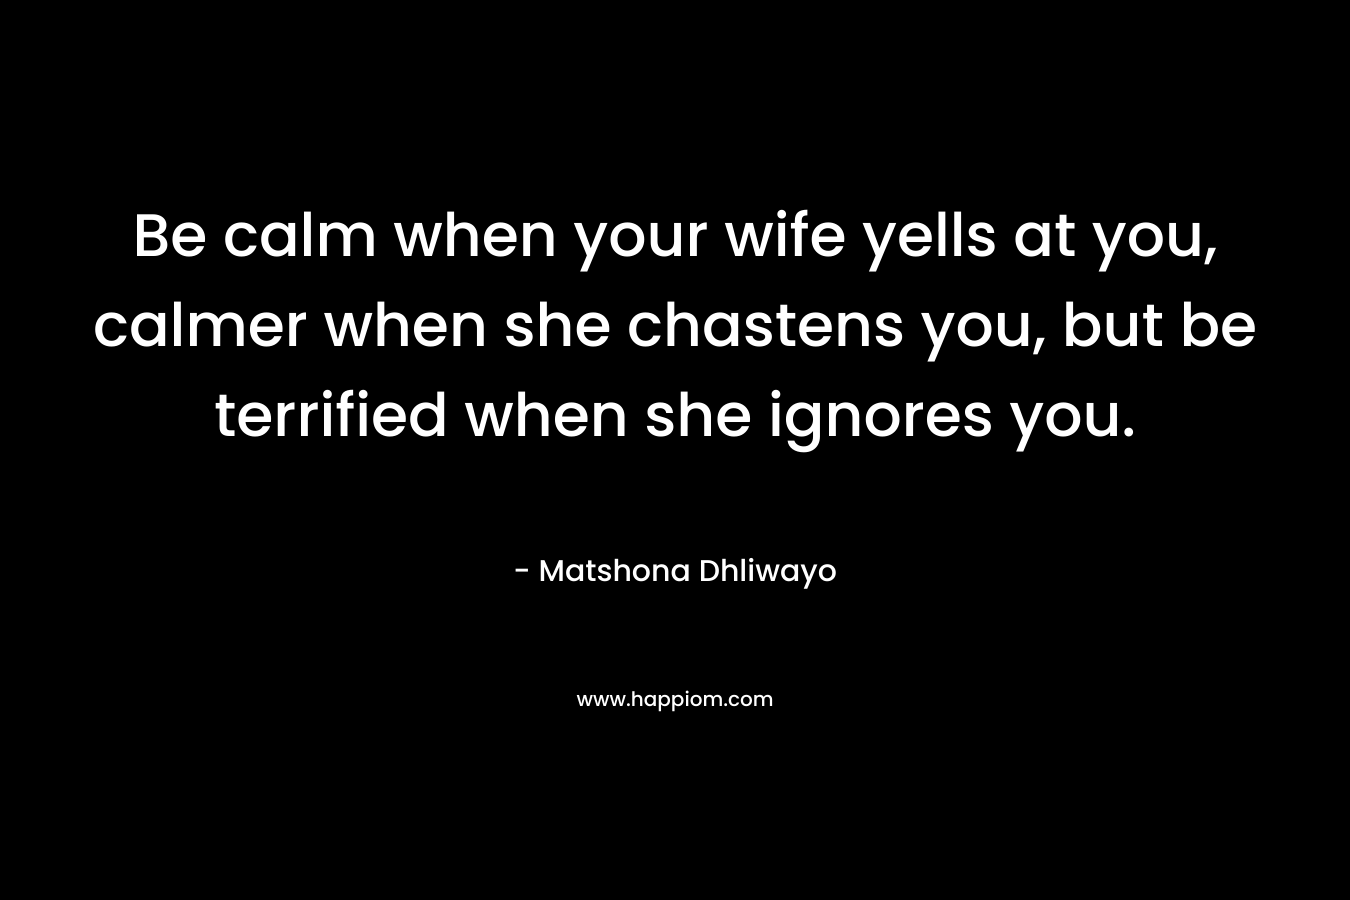 Be calm when your wife yells at you, calmer when she chastens you, but be terrified when she ignores you. – Matshona Dhliwayo